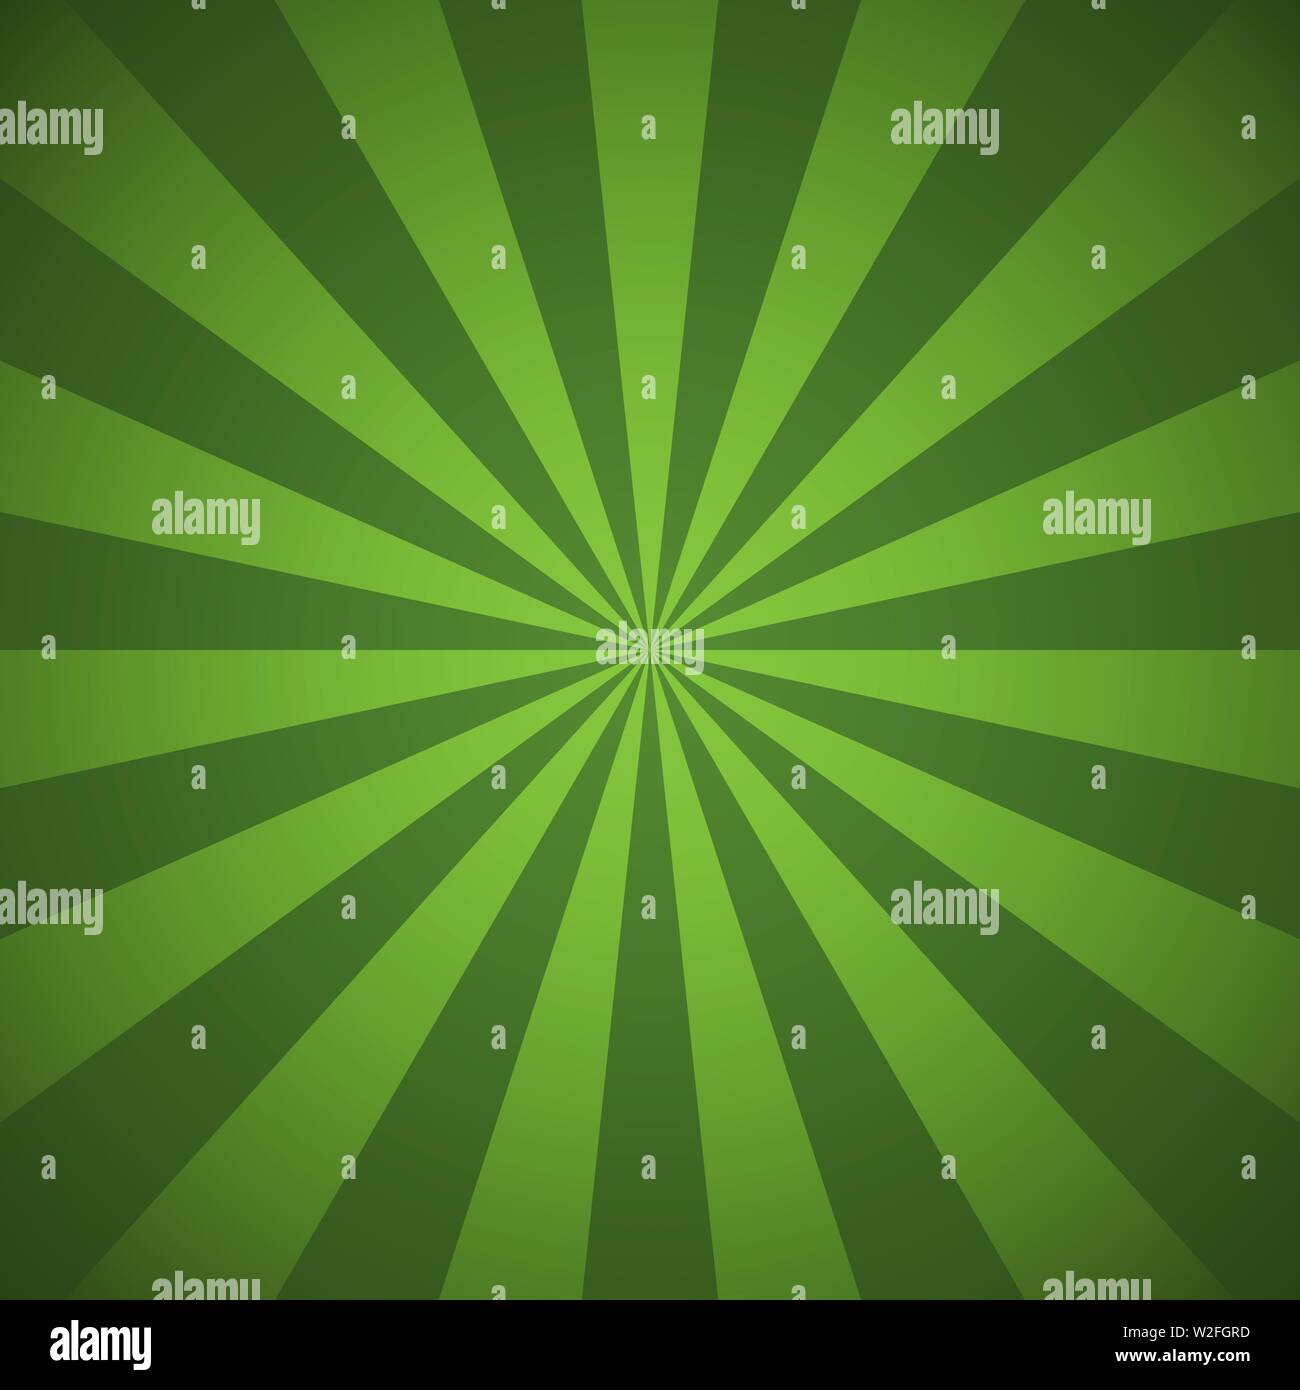 Green beams and rays abstract vector illustration radial lines background Stock Vector